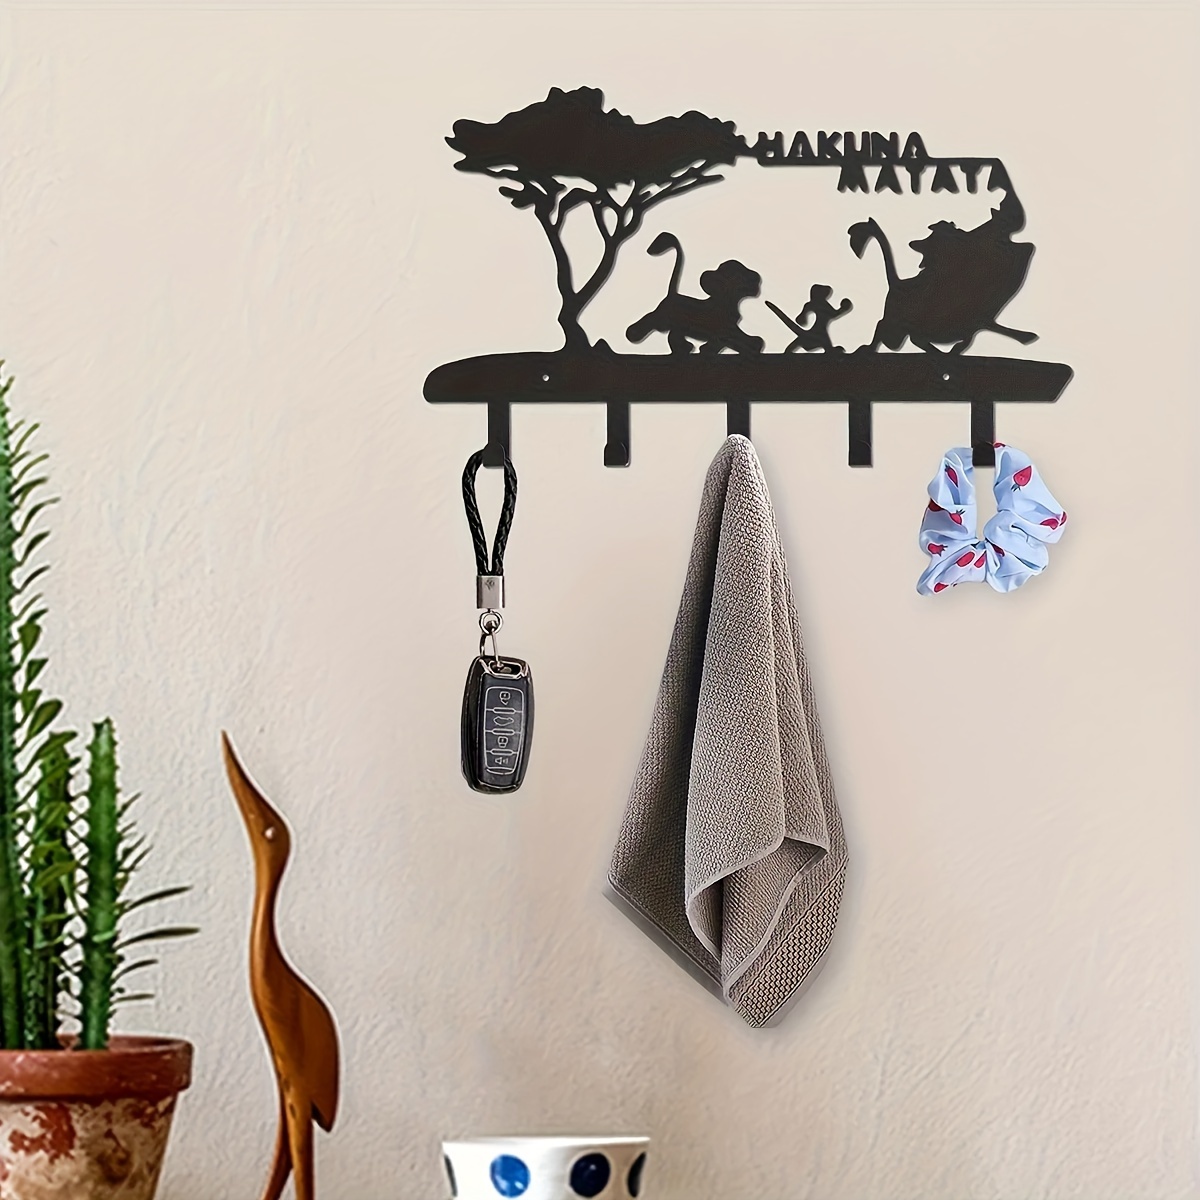 

Rustic Metal Key Holder With 5 Hooks - Easy Install, Wall Mounted Key Rack Hanger For Home Decor - Hakuna Matata Design - 1pc